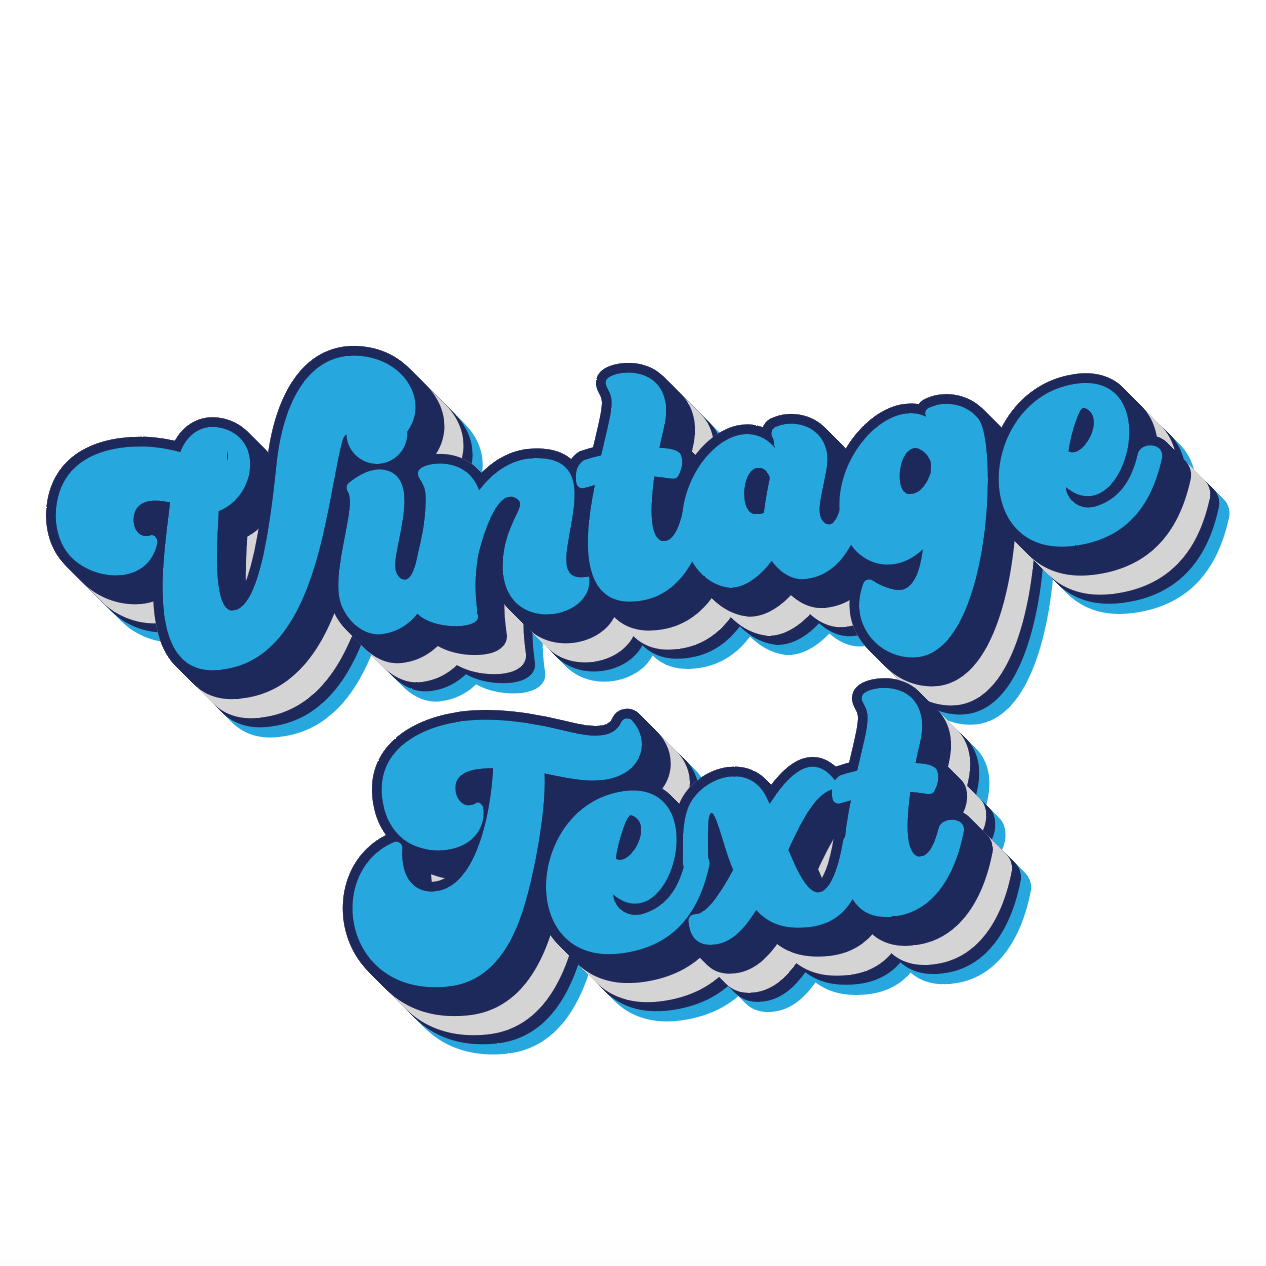 How to Make Vintage Text in Adobe Illustrator